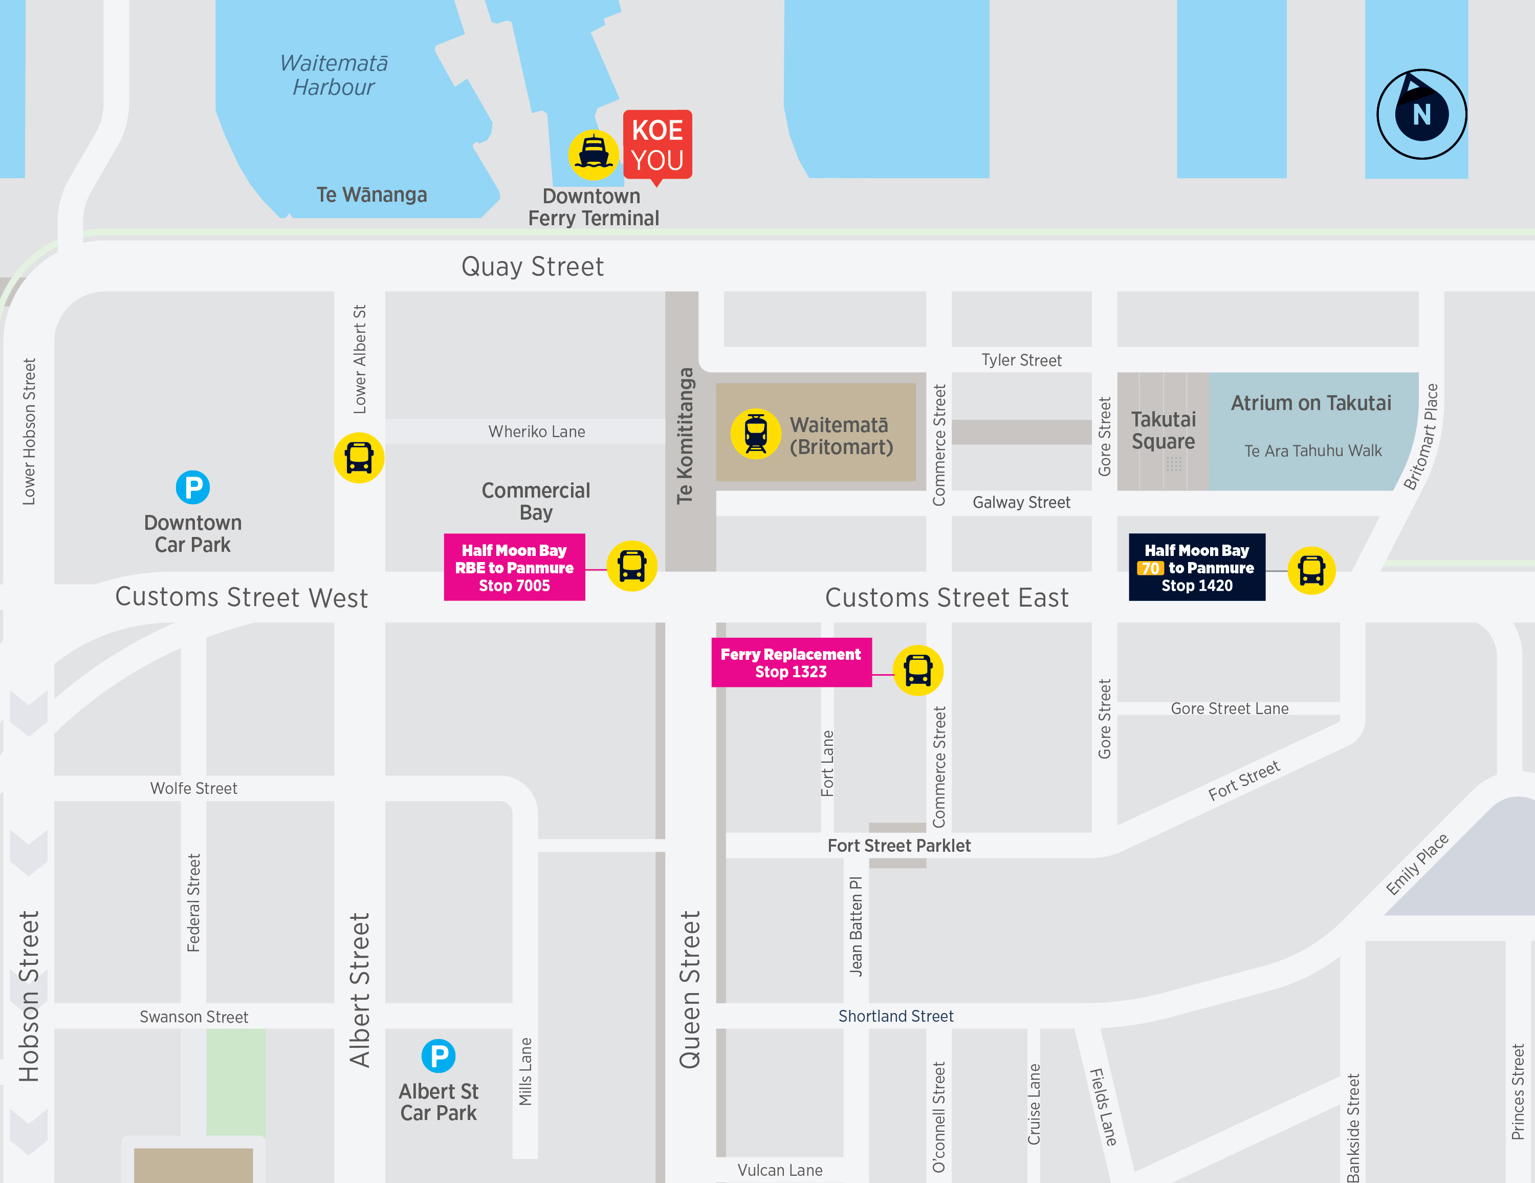 Map showing the ferry replacement bus stop locations along Customs Street East and West  in downtown Auckland.